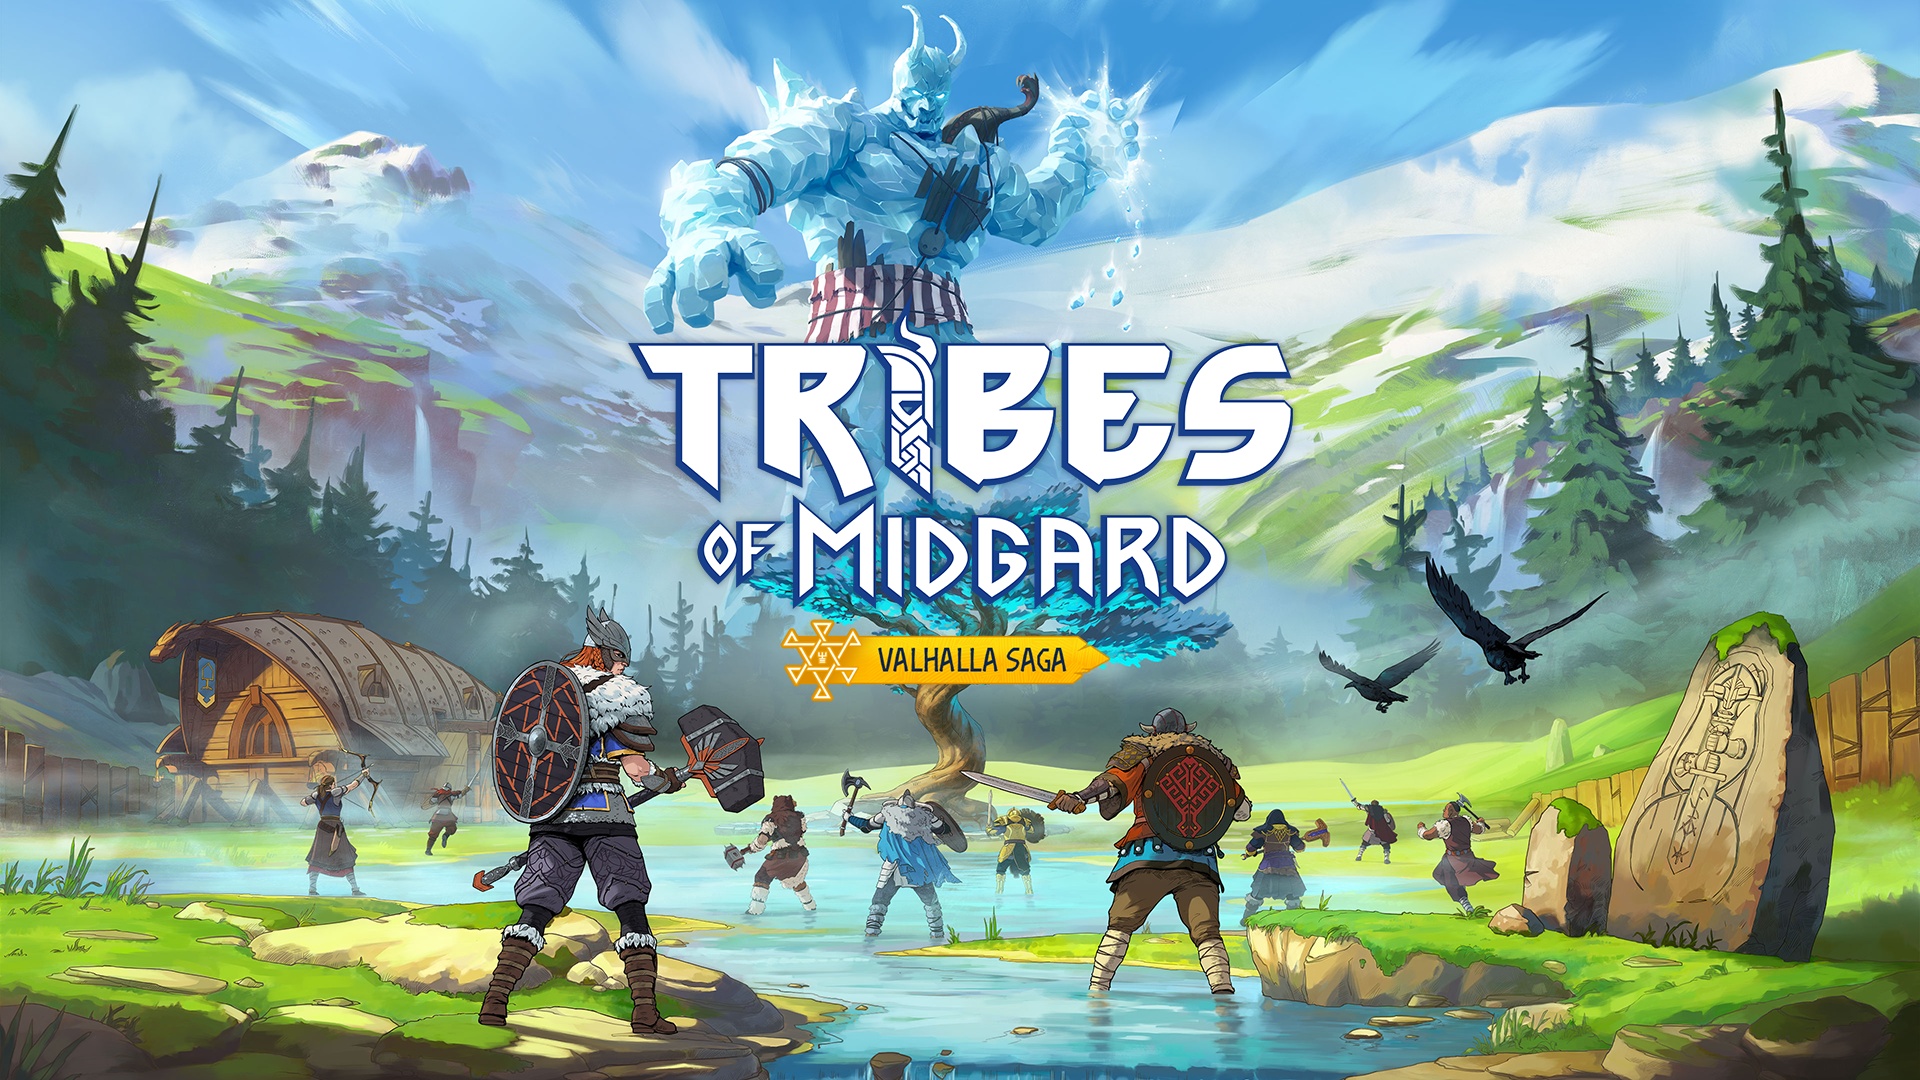 “Valhalla Saga” update for Tribes of Midgard now live with fourth boss, story climax and mounts